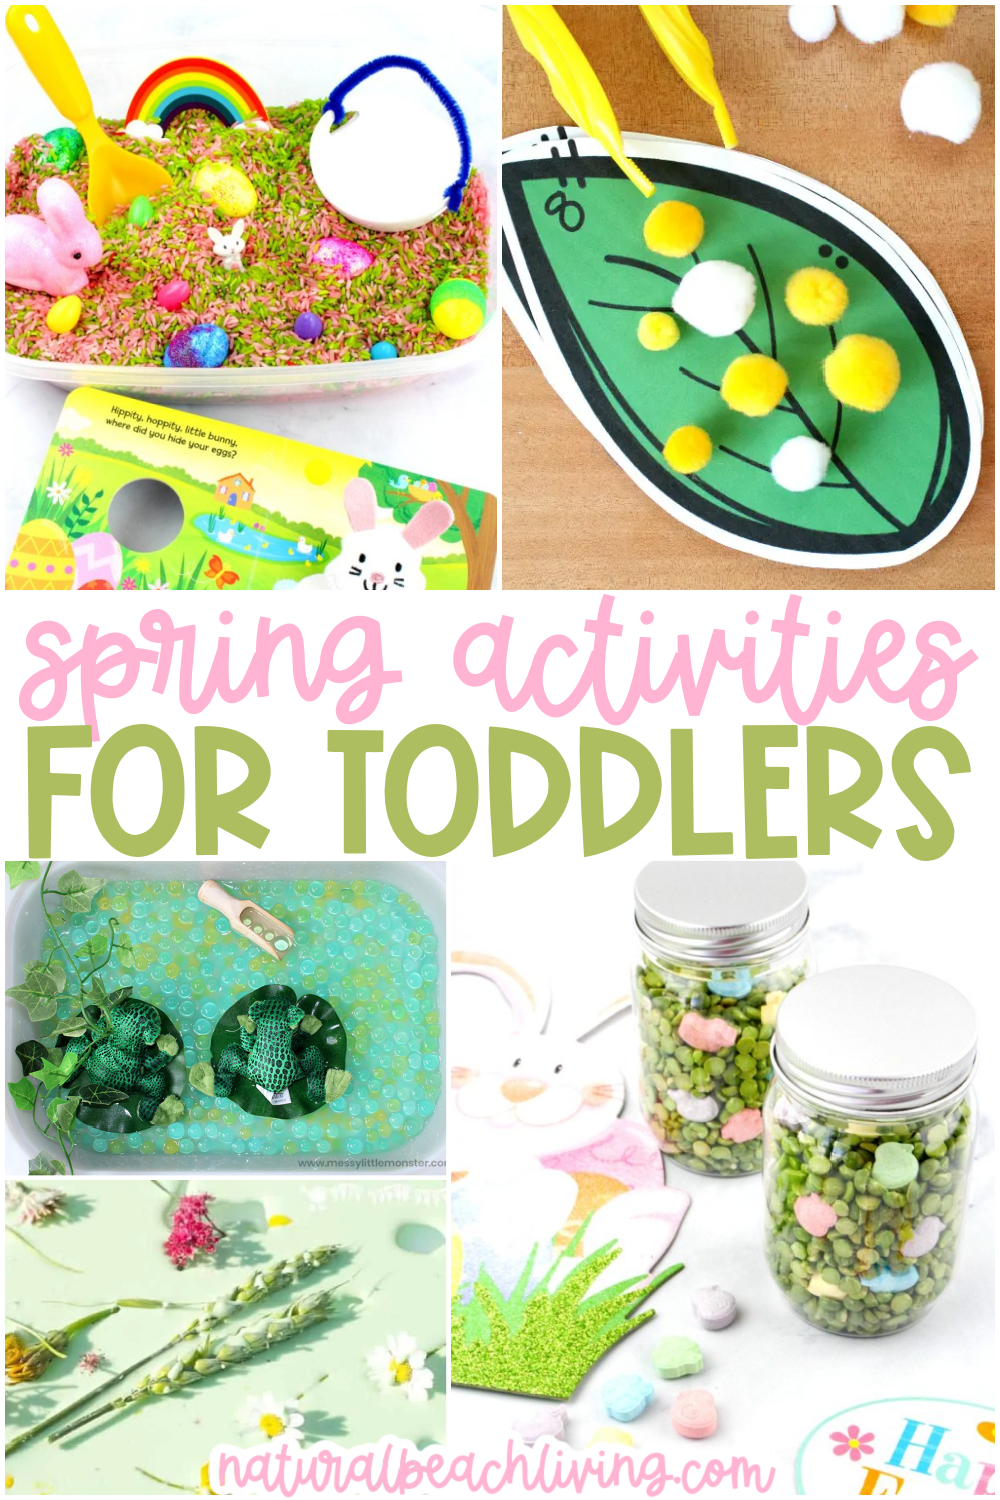 28 FUN Spring Activities for Toddlers, We’ve got plenty of ideas to keep your toddler entertained this spring season, from exploring nature to digging through spring sensory bins to making cute spring crafts. Spring Activities for 2 year olds and 3 year olds